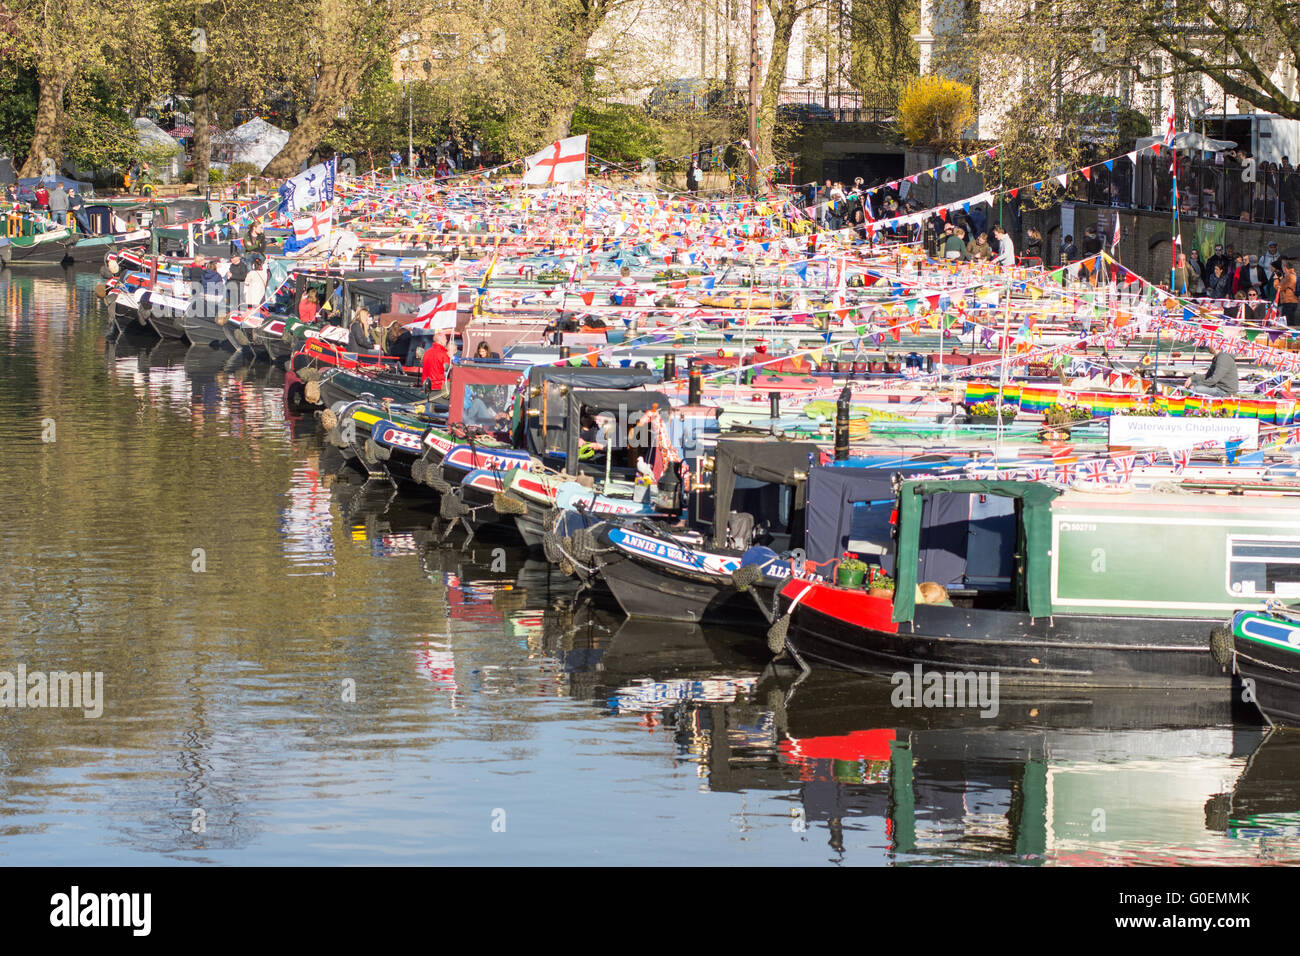 London, UK. 1st May, 2016. London, England - April 30, 2016: Canal boats gather at Little Venice on the Grand Union Canal for the Inland Waterways Association Cavalcade. Credit:  Joe Dunckley/Alamy Live News Stock Photo